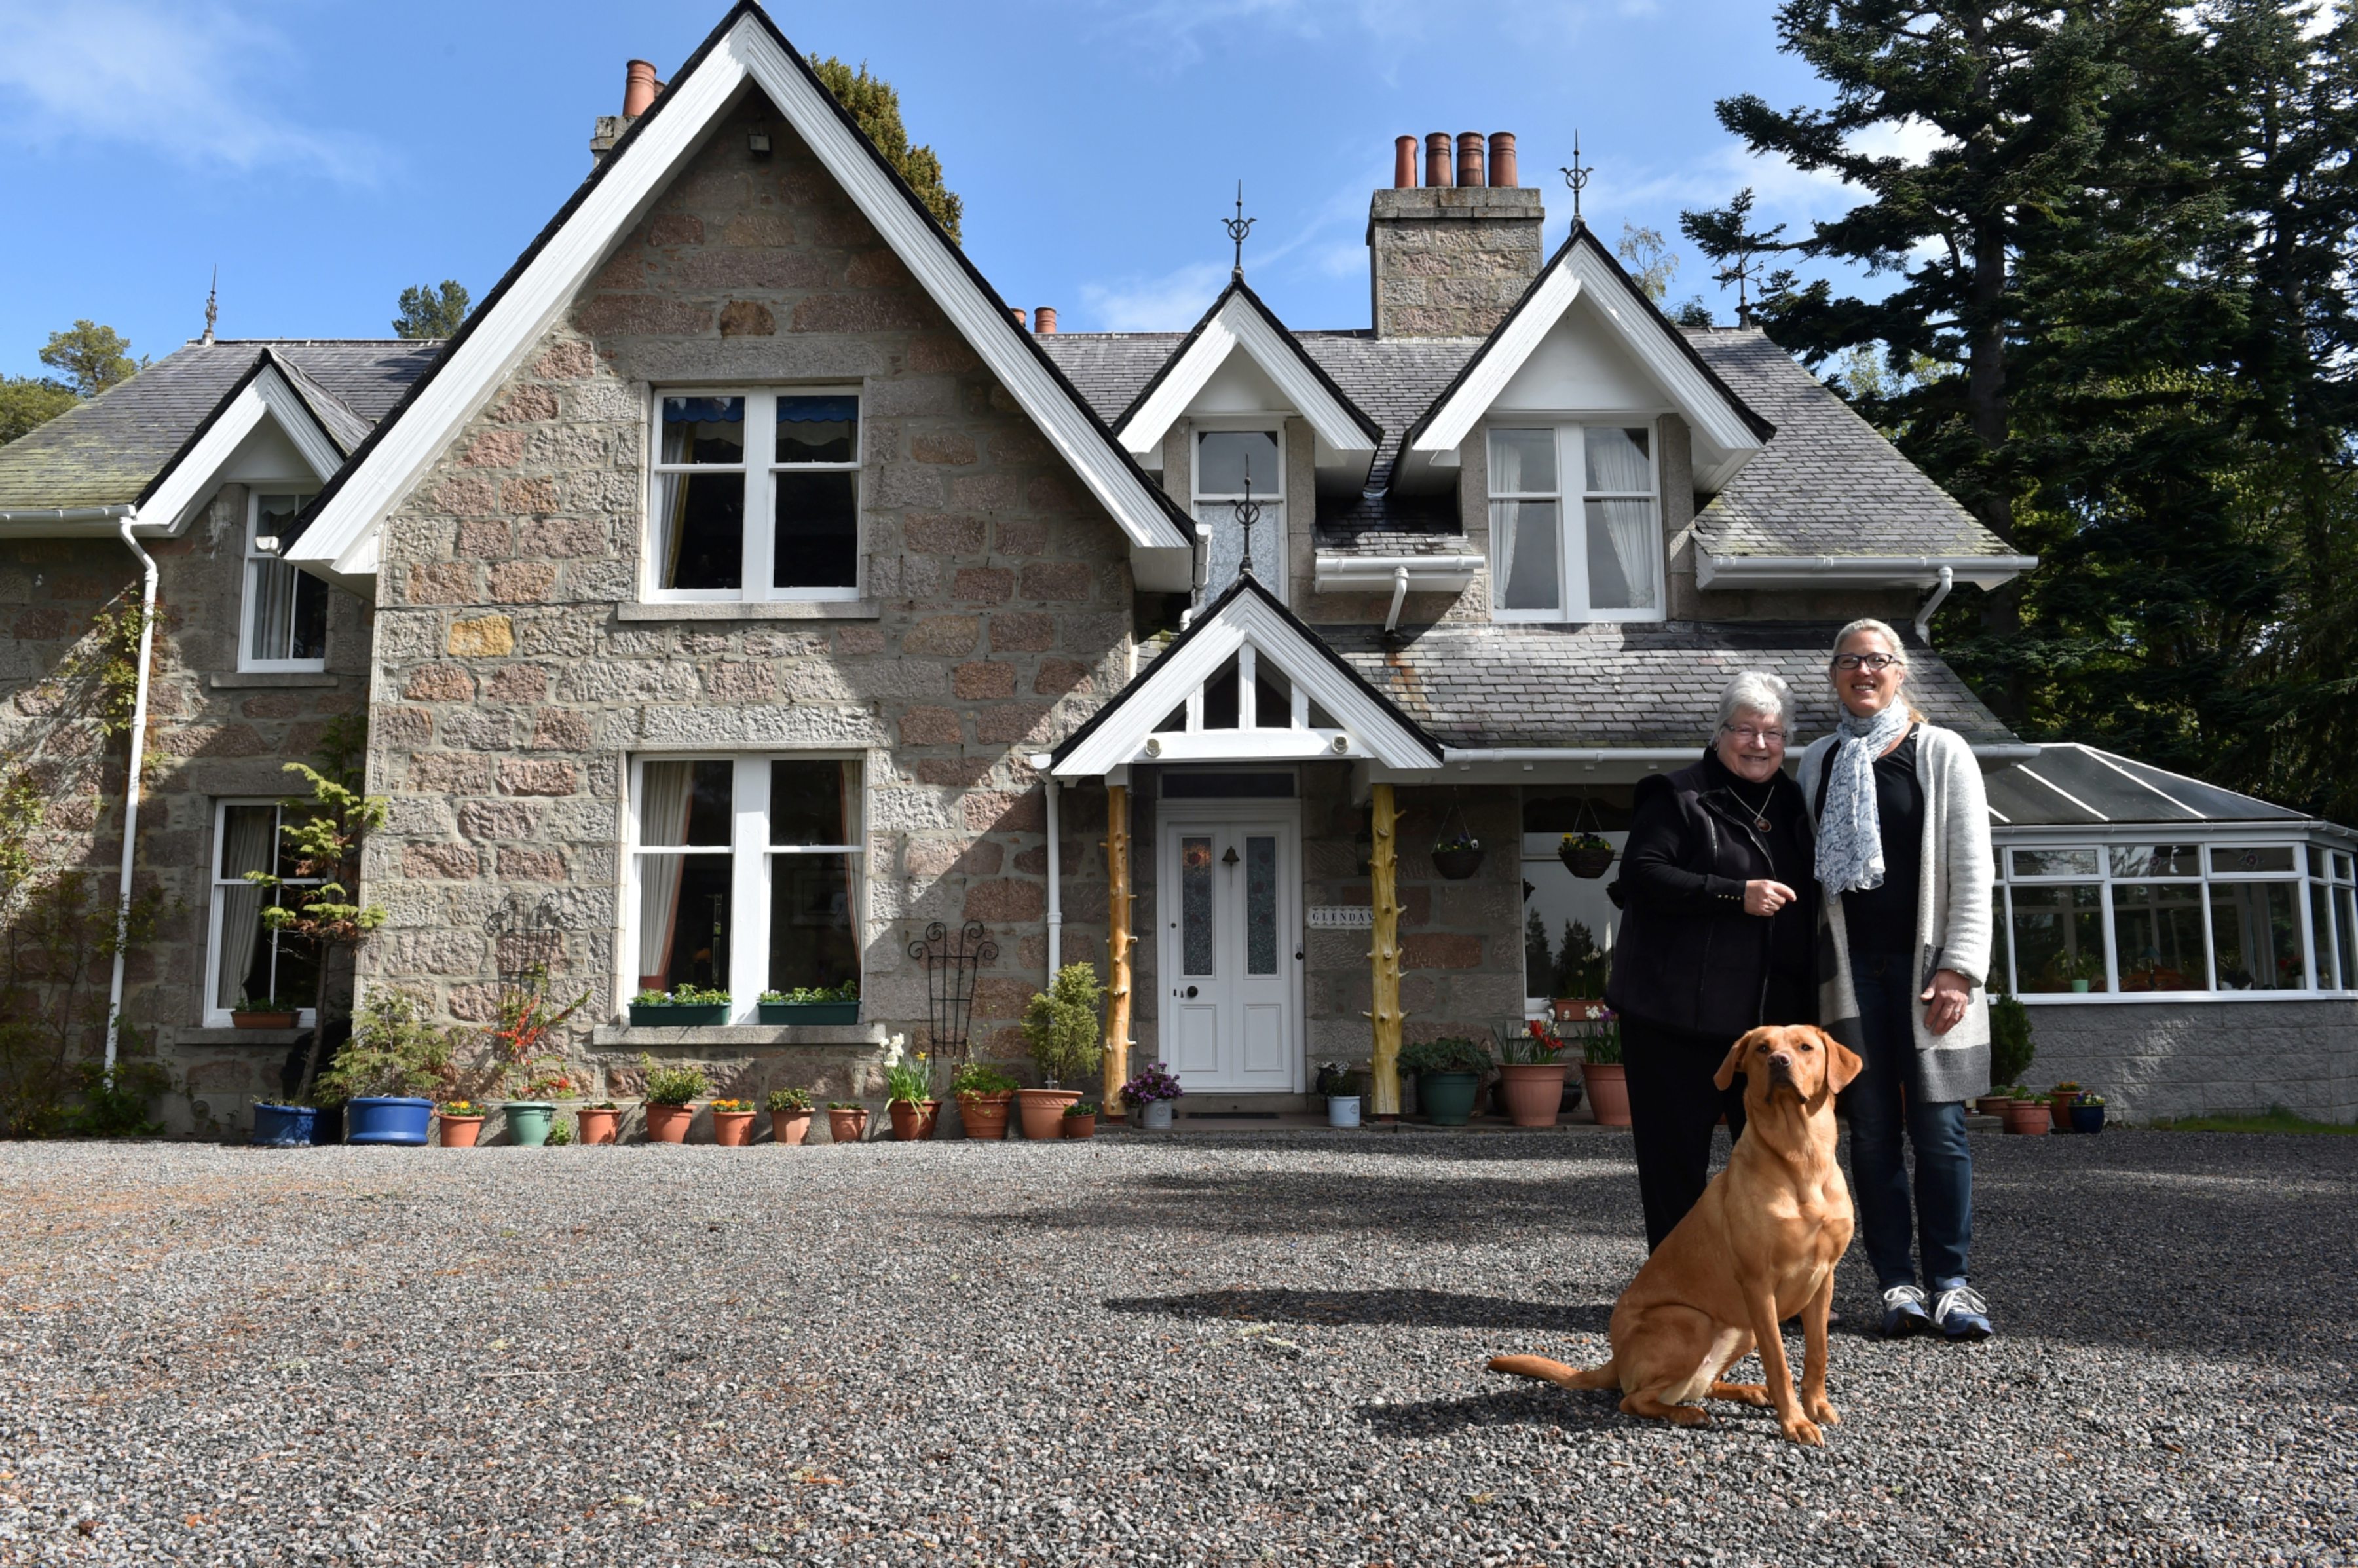 Moira Milne has run Glendavan House for 40 years and is now run by daughter Rebecca, They are pictured with their dog Lex.
Picture by Colin Rennie.